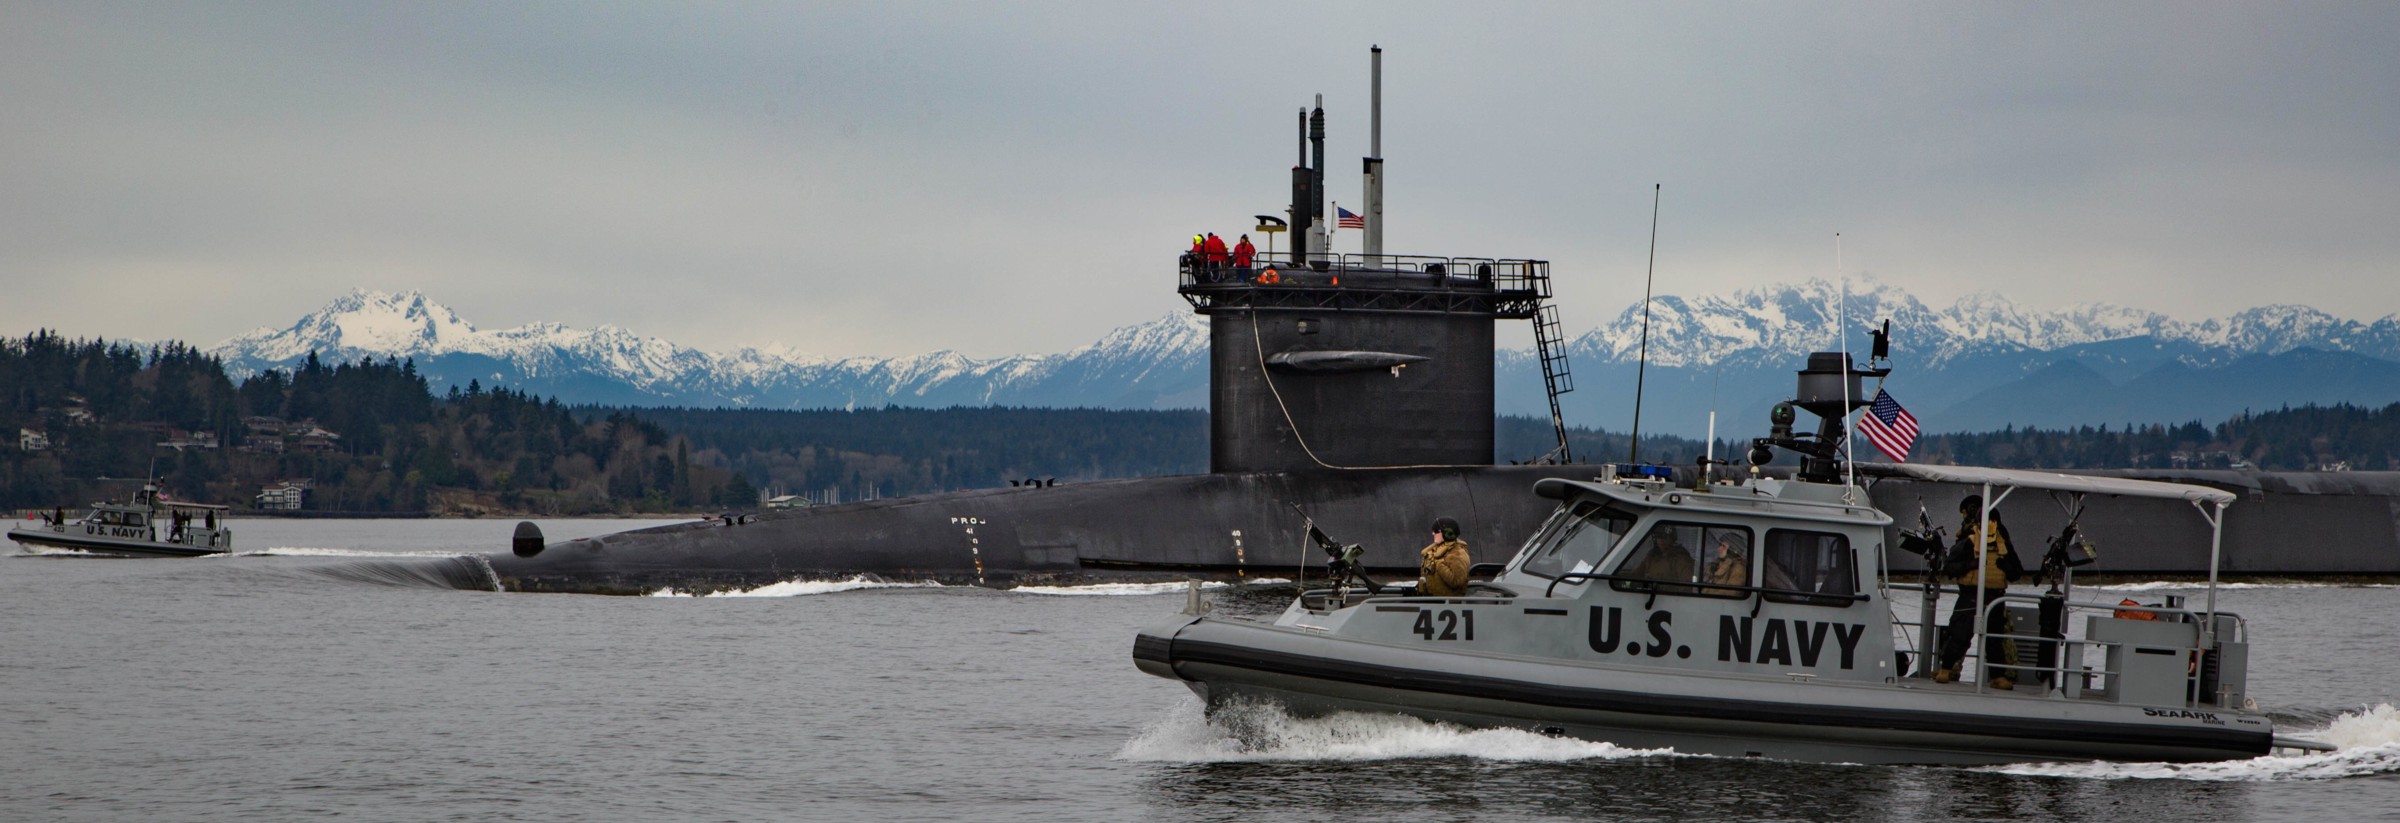 ssgn-726 uss ohio guided missile submarine us navy 2017 03 puget sound